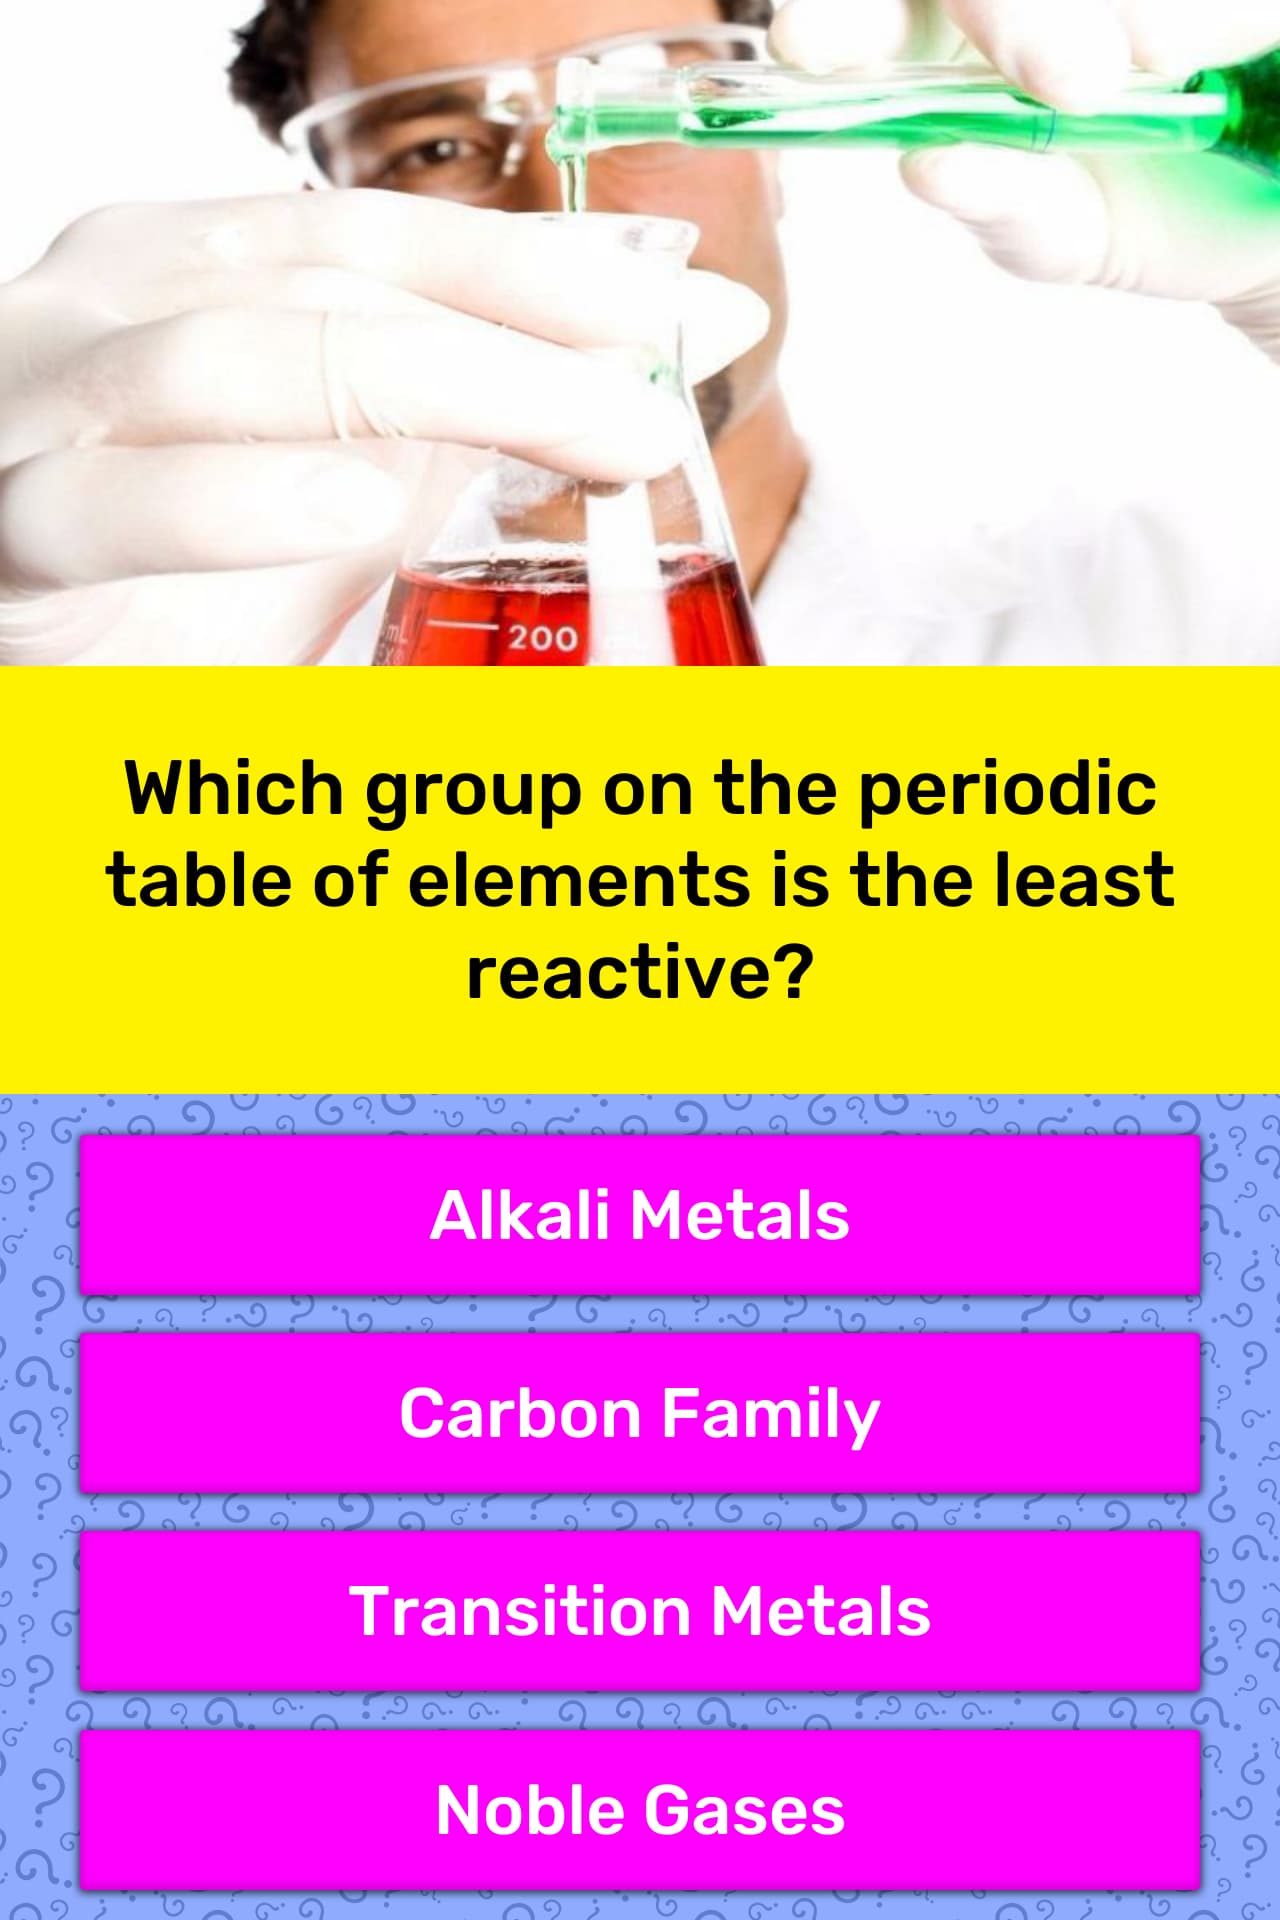 Periodic Table Of Elements Reactivity - About Elements